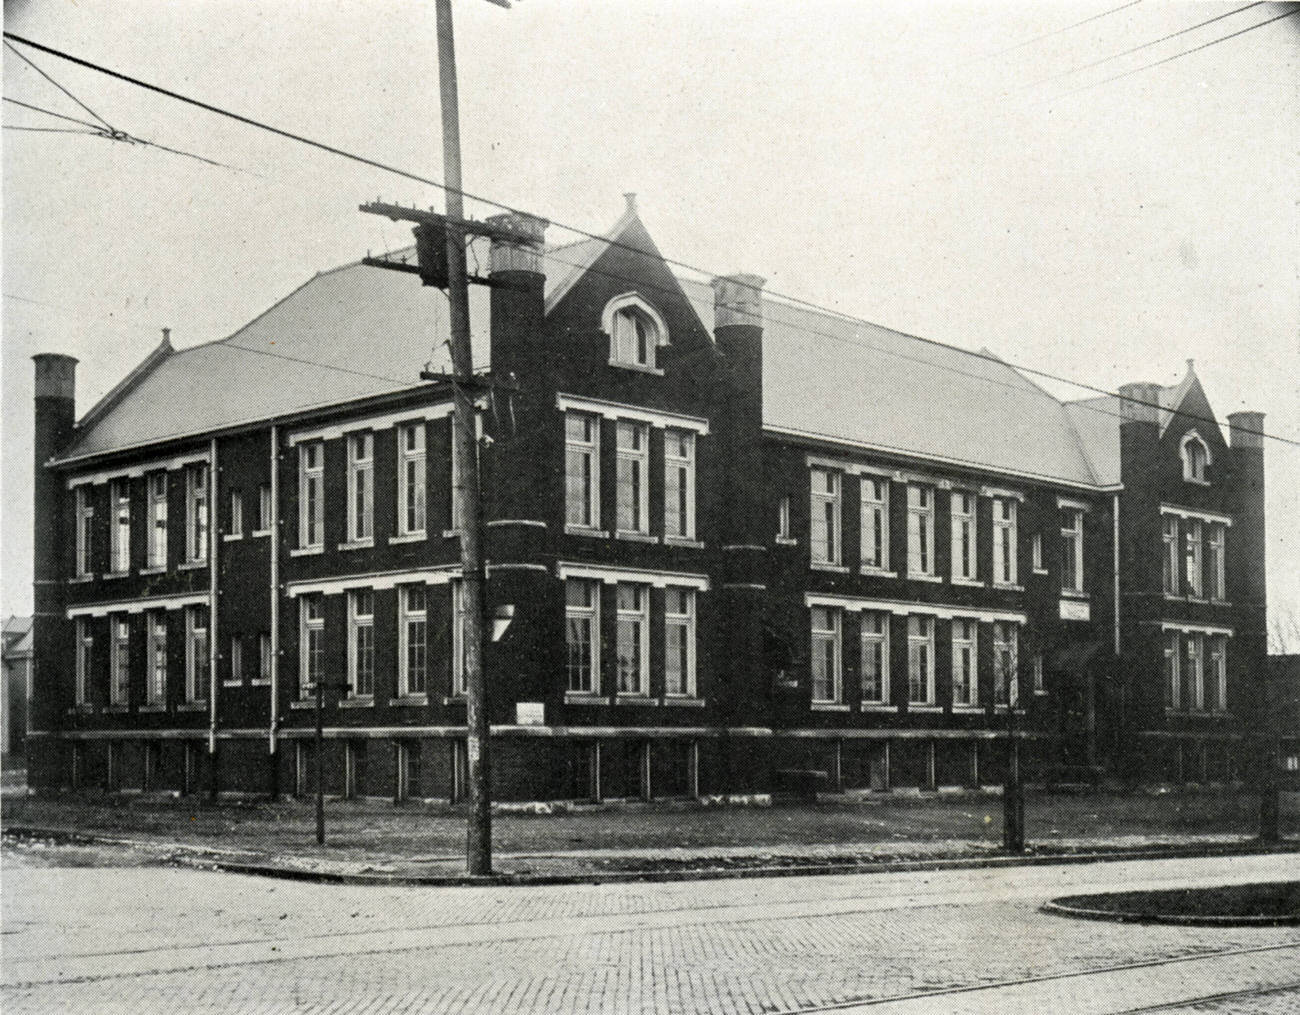 Holy Family School, built in 1912 and closed in 1971, Circa 1915.